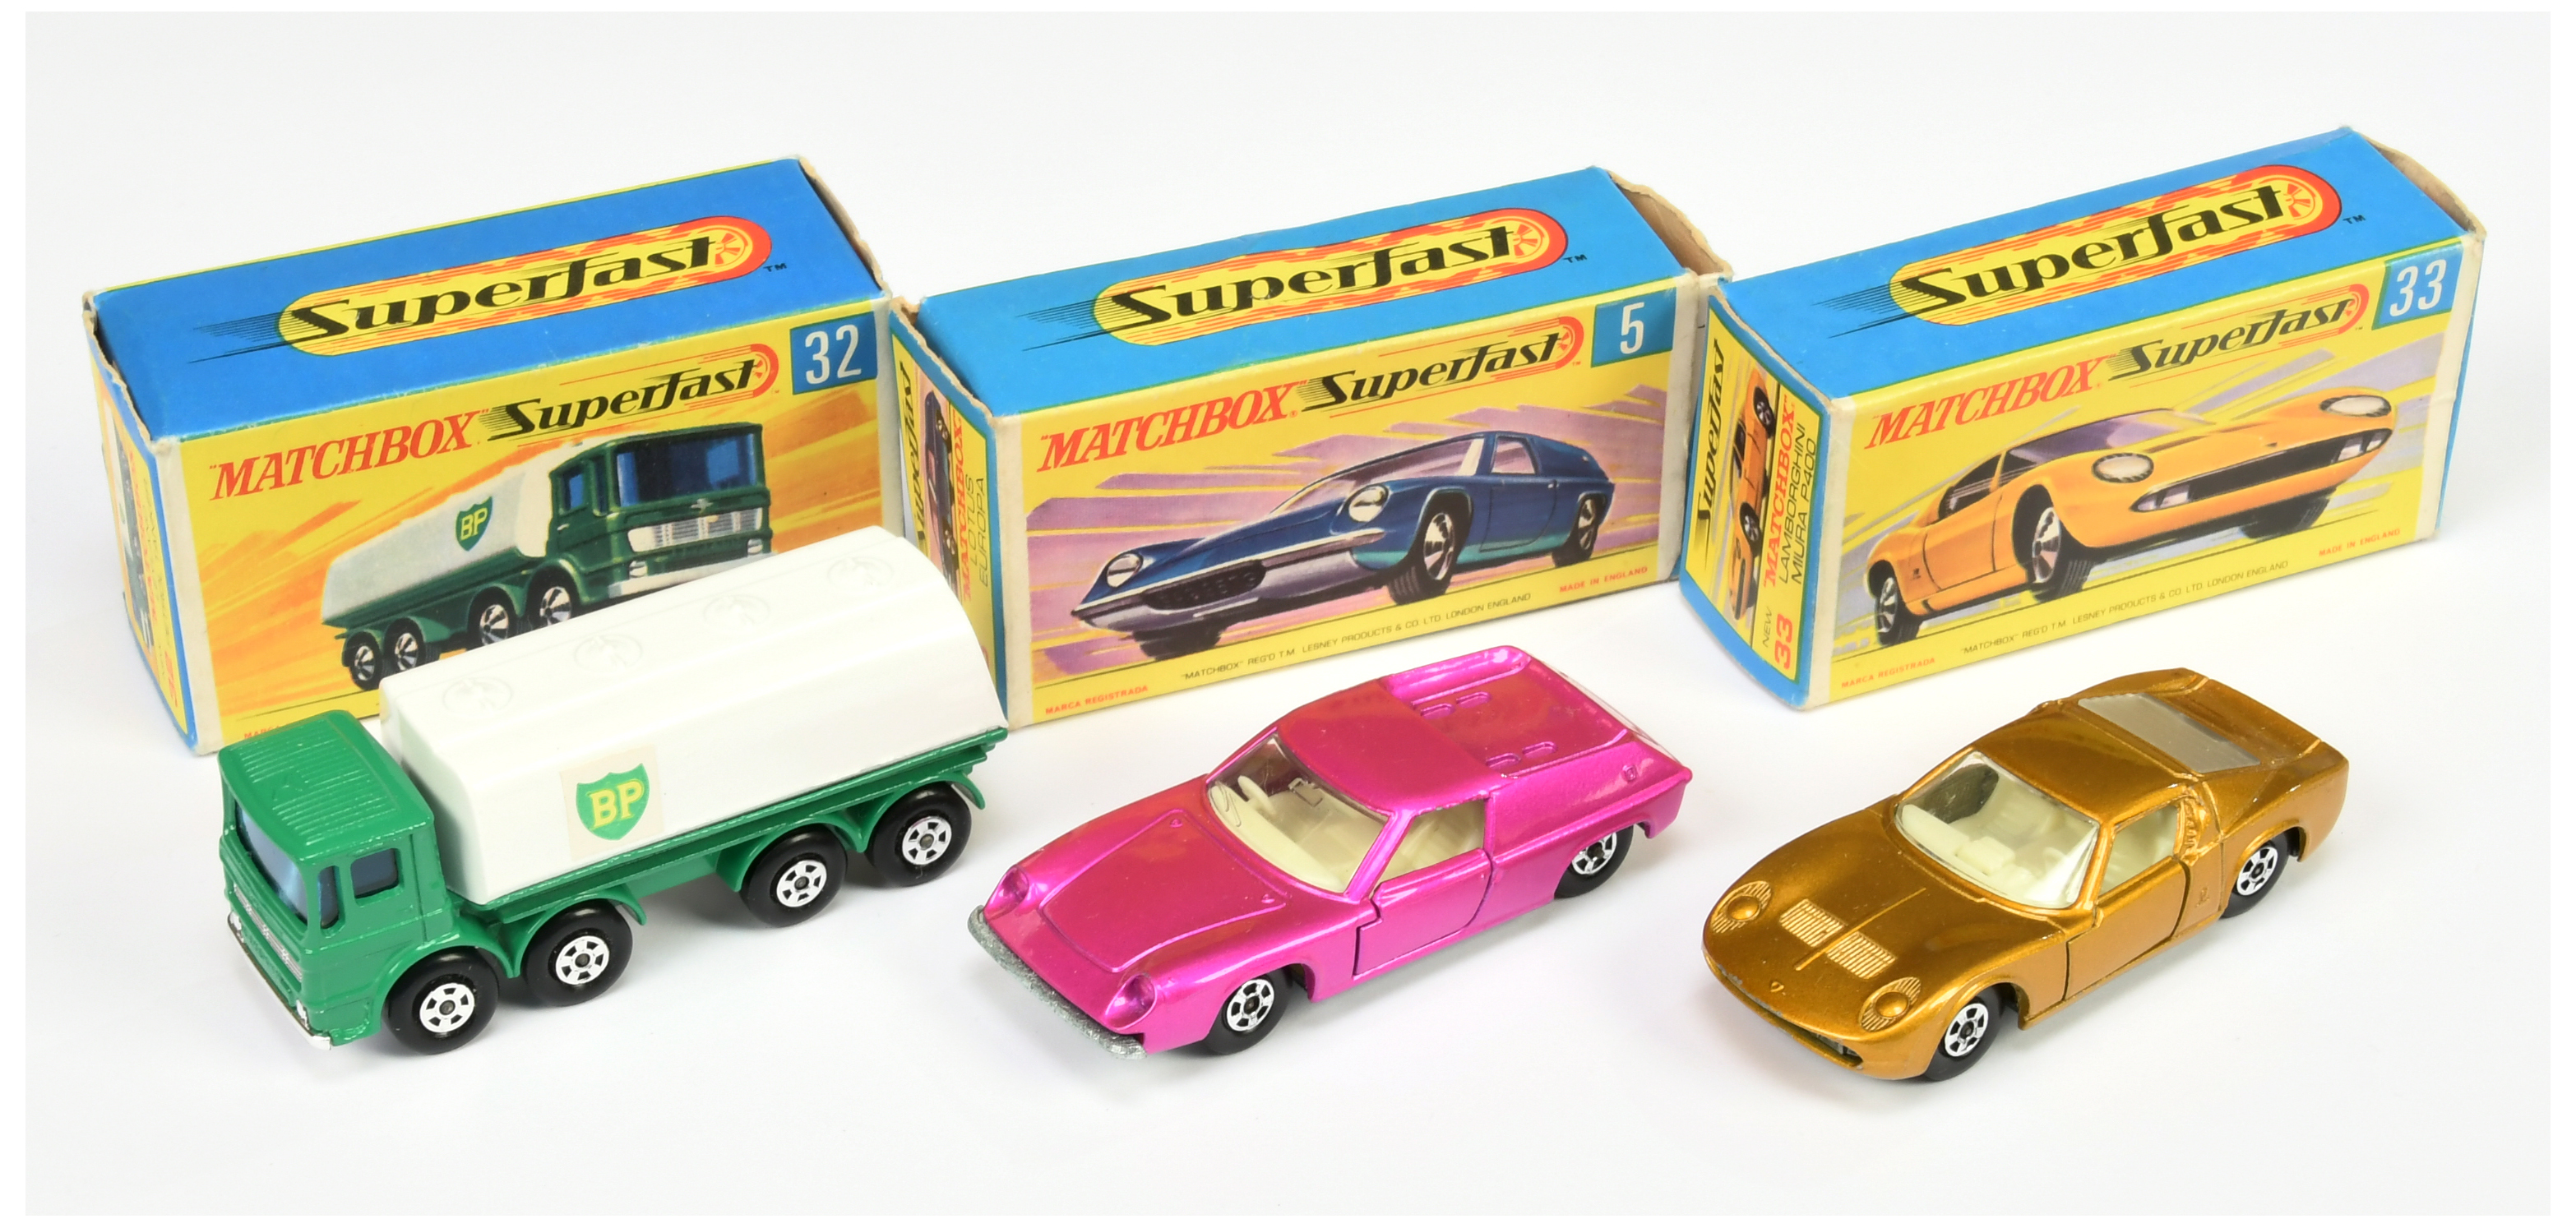 Matchbox Superfast group (1) 5a Lotus Europa - metallic candy pink body with low arches, solid 5-...